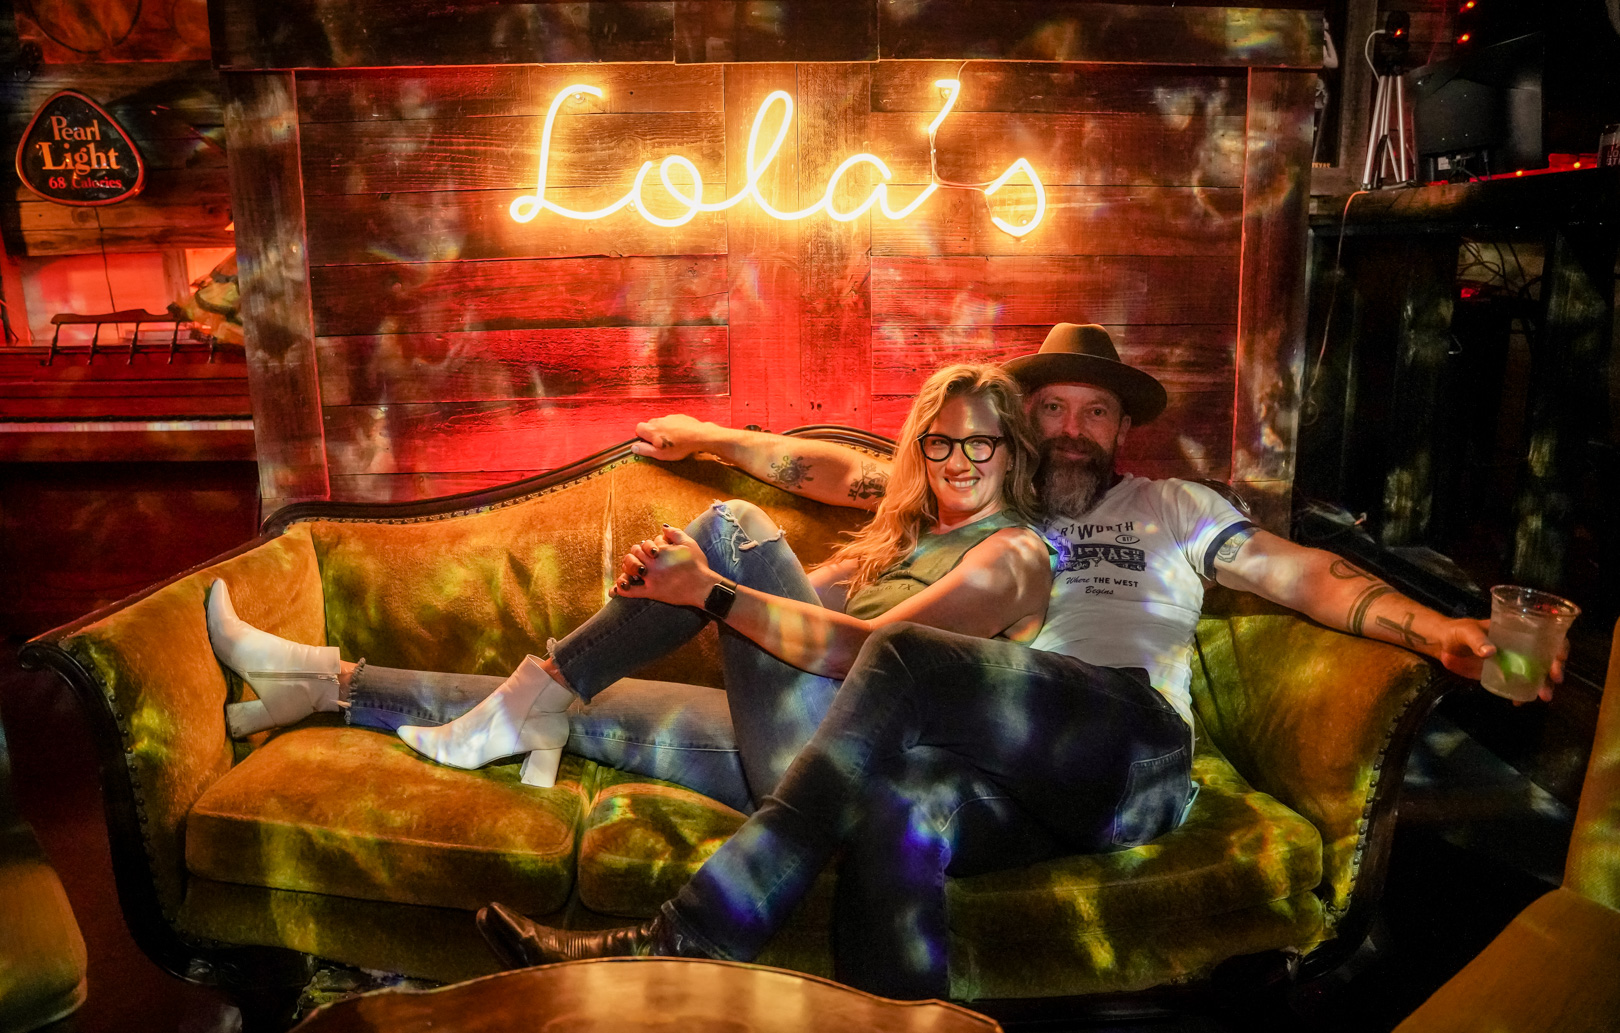 A woman and man sit on a couch with a neon sign that says "Lola's"